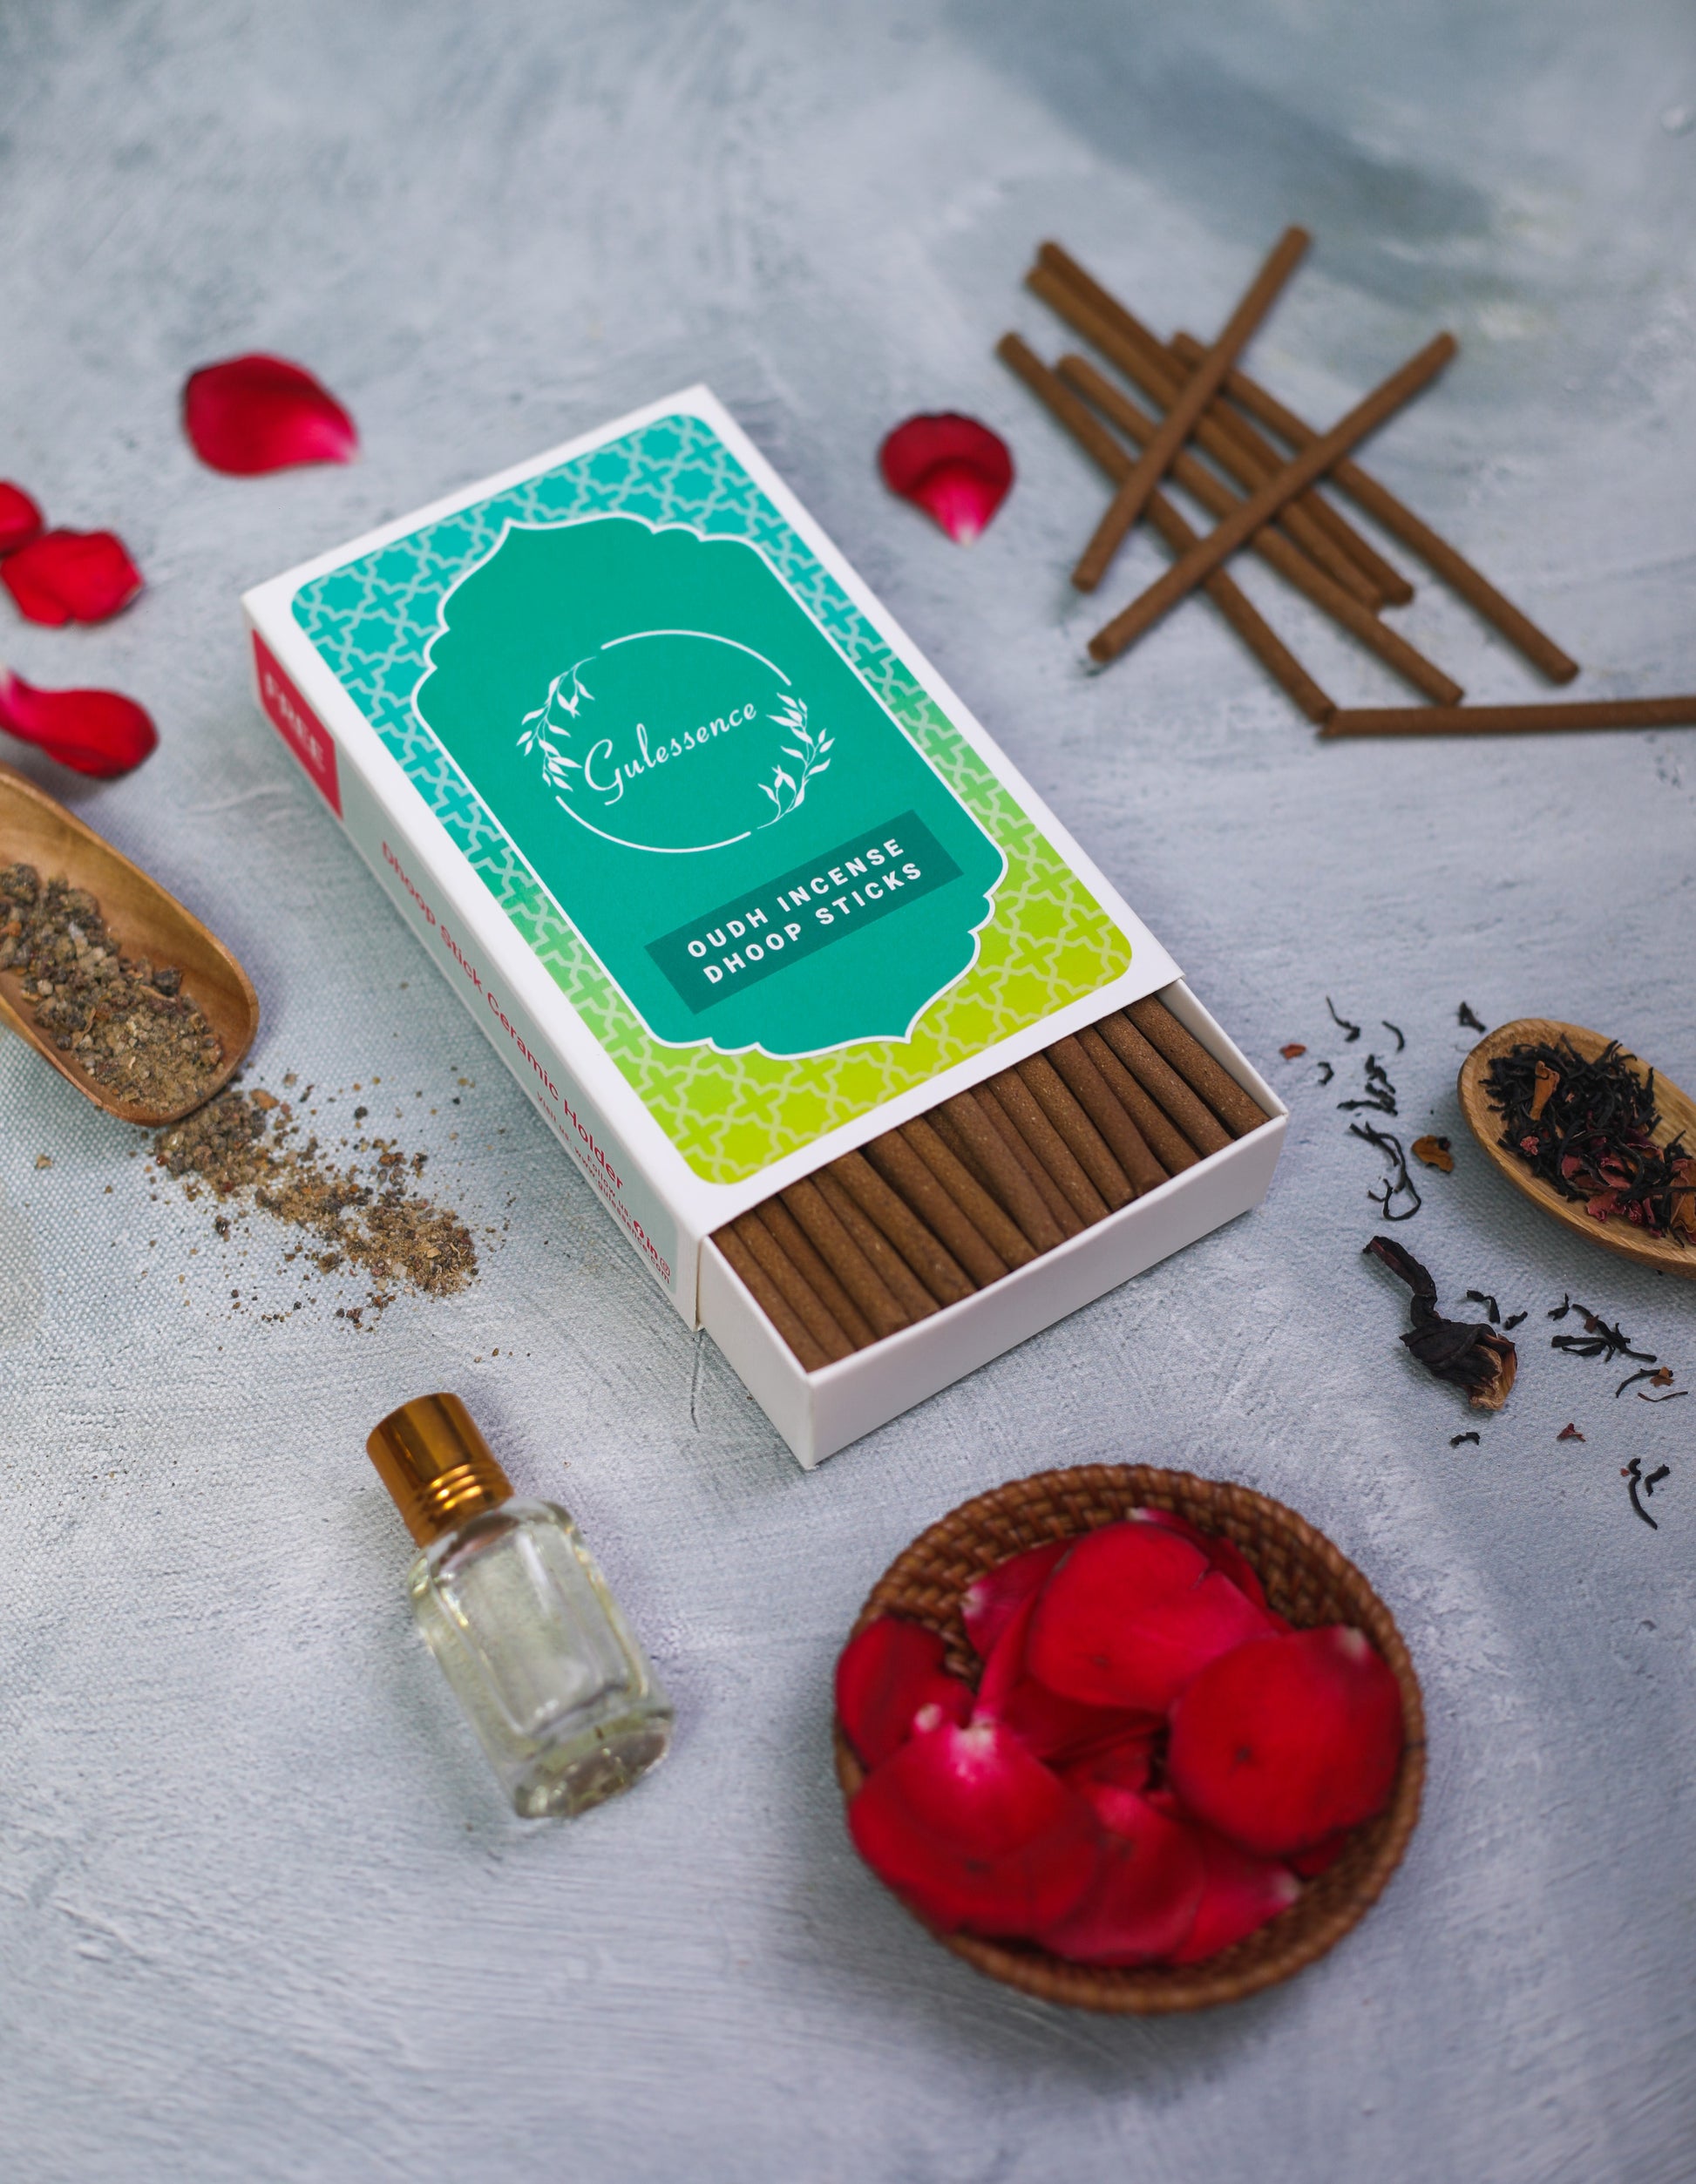 Sandalwood Incense stick & Oudh Dhoop sticks Petrichor - Made from Temple Flowers | Combo Boxes | Gulessence - Gulessence